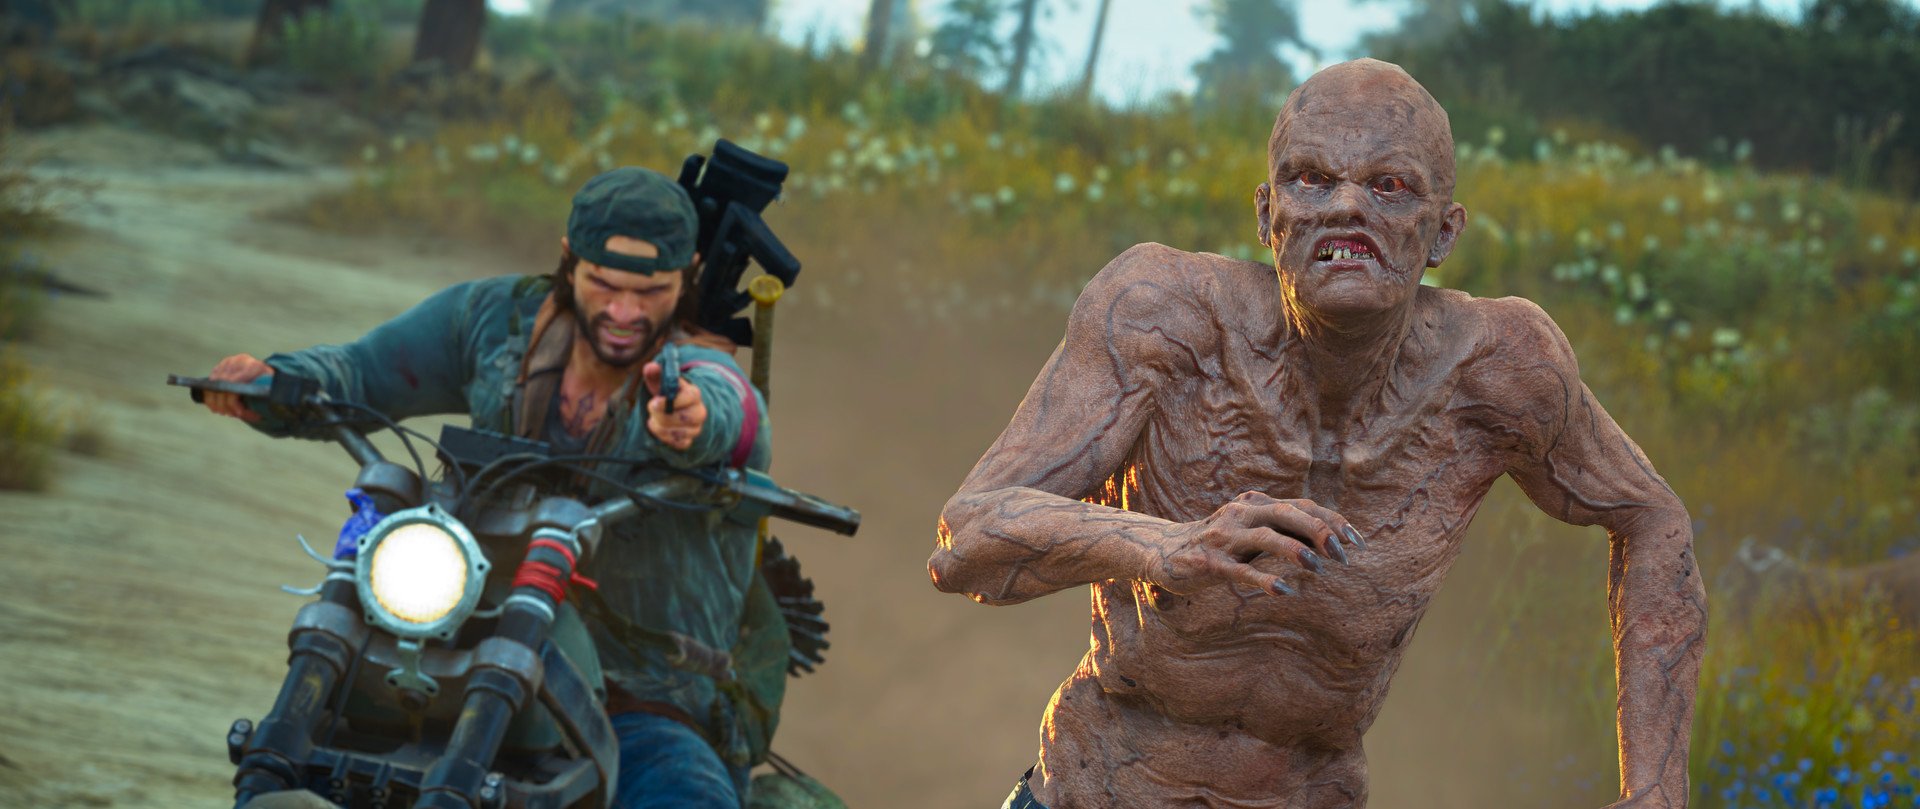 Rino on X: Sony may not be done with Days Gone and the IP may still  viable🚀 ✓Days Gone movie was reported to be in the works as of August  2022, with